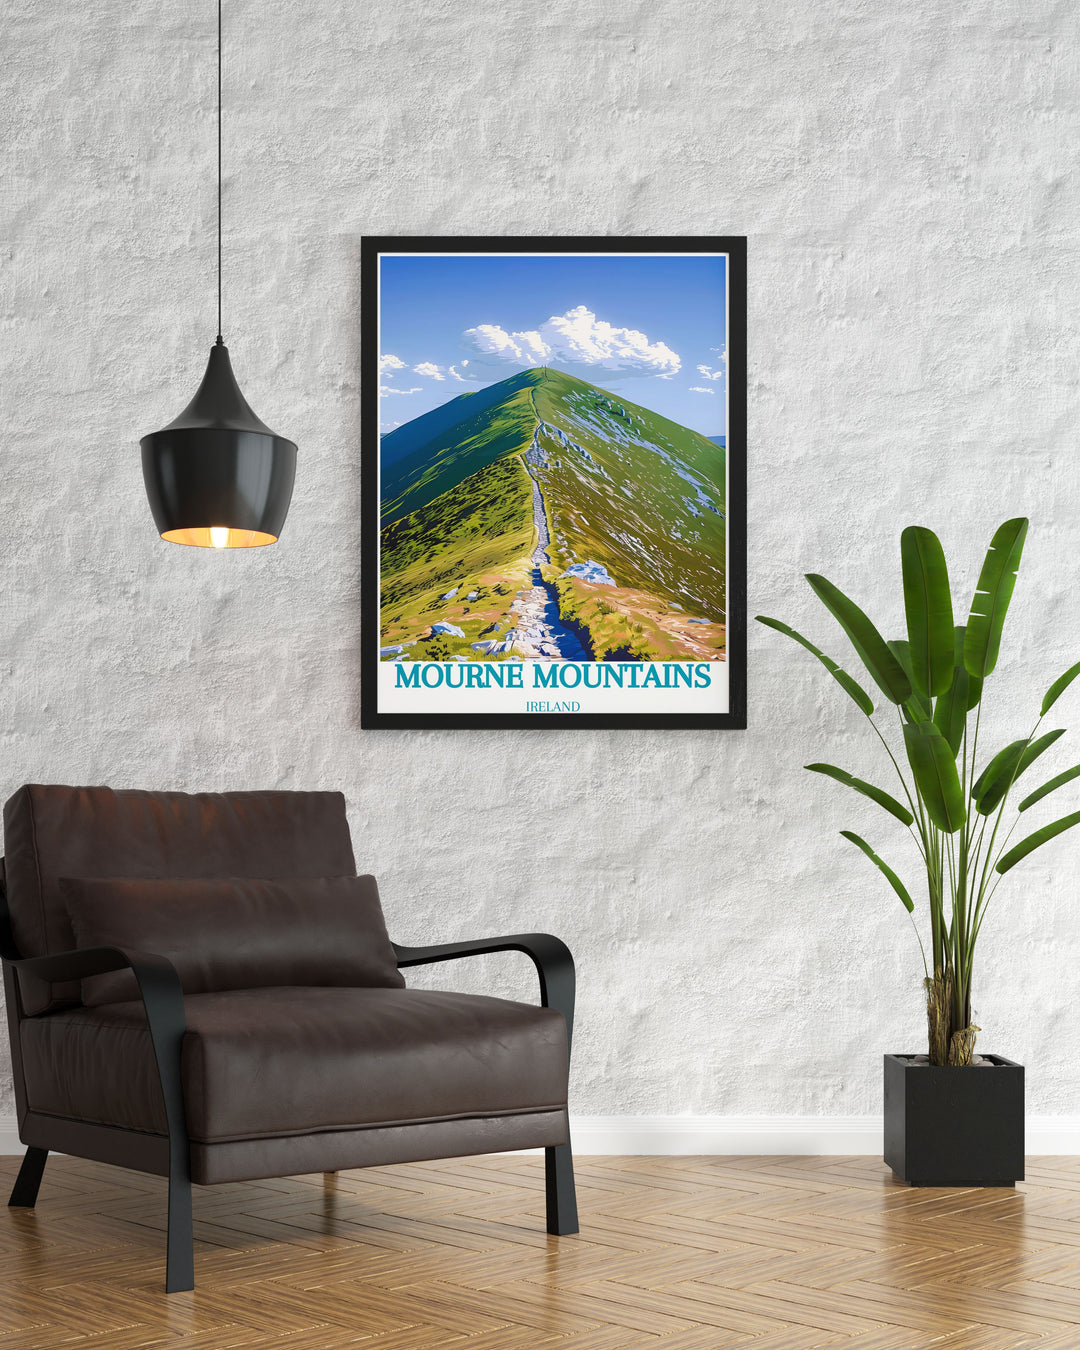 Showcasing both the rugged peaks of the Mourne Mountains and the towering Slieve Donard, this travel poster captures the unique blend of dramatic landscapes and serene beauty, perfect for enhancing your living space with natural charm.